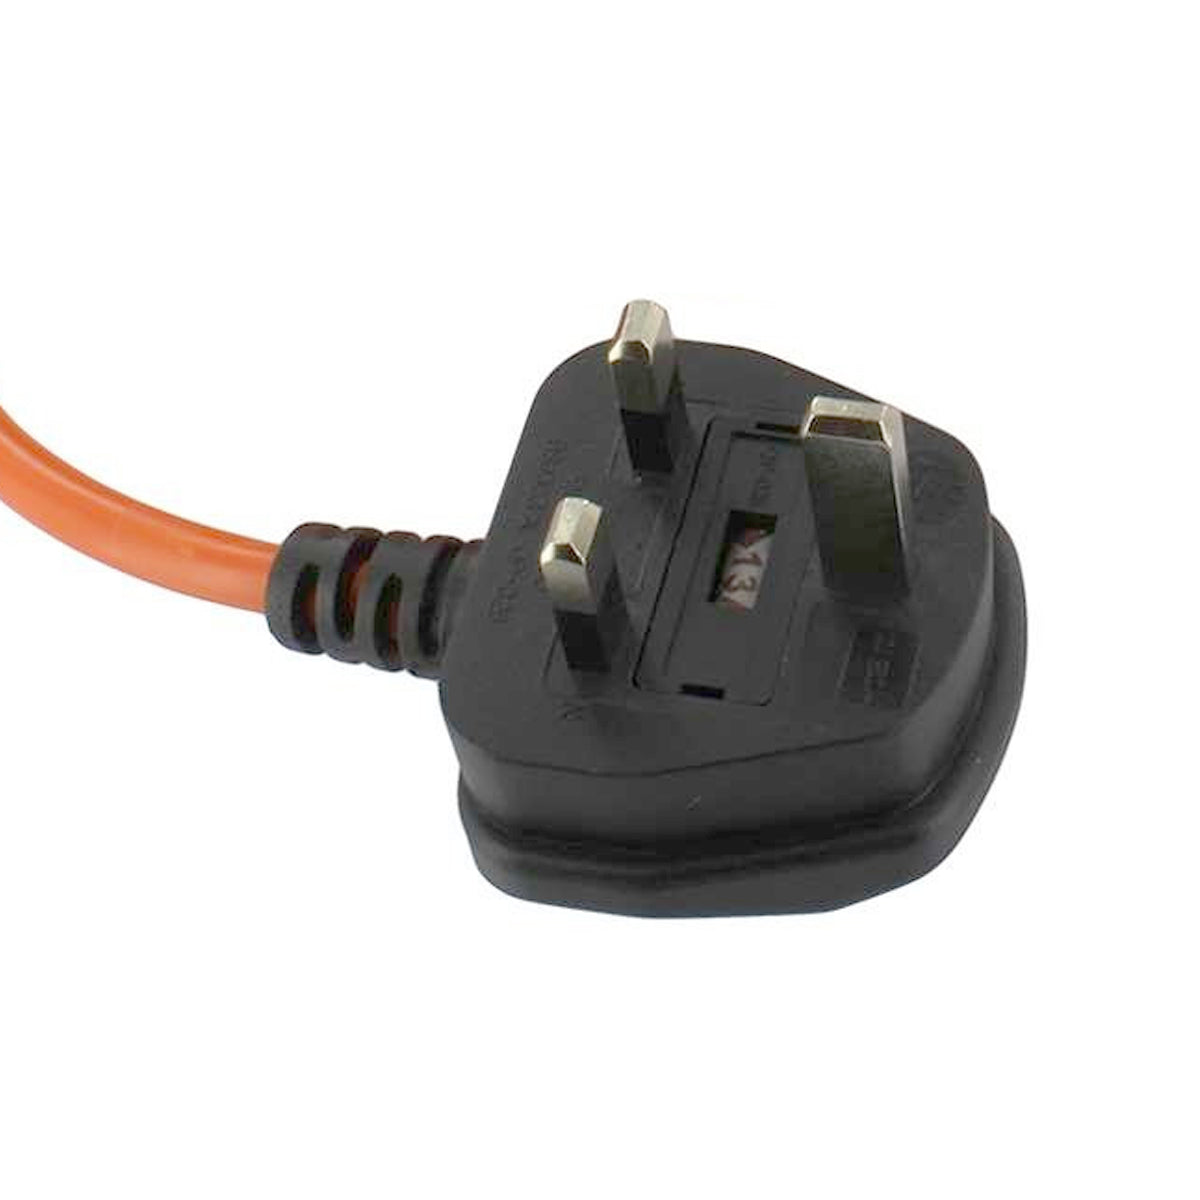 12m Power Cable For Flymo Hover Vac 280 Lawnmower Extra Long Lead with Plug